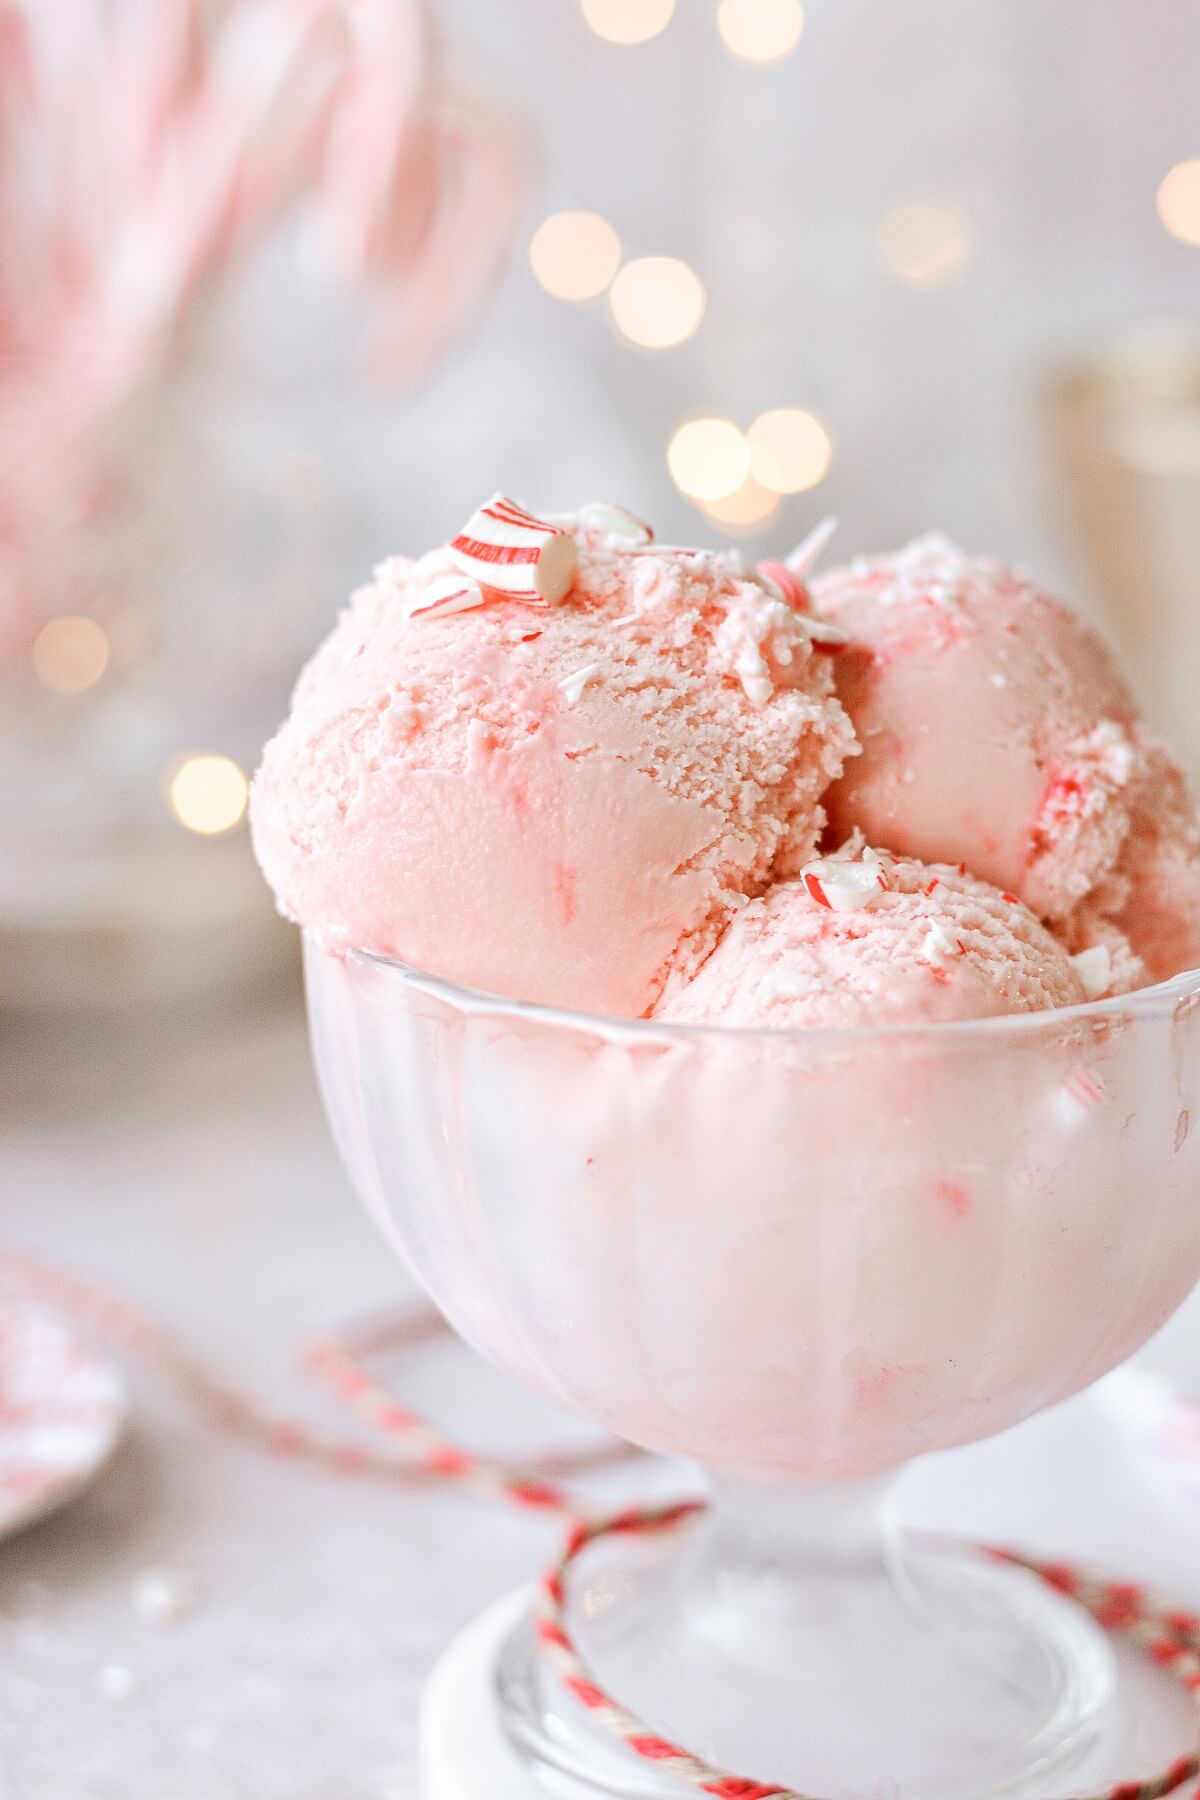 Scoops of pink peppermint ice cream in a glass footed bowl with twinkling lights in the background.